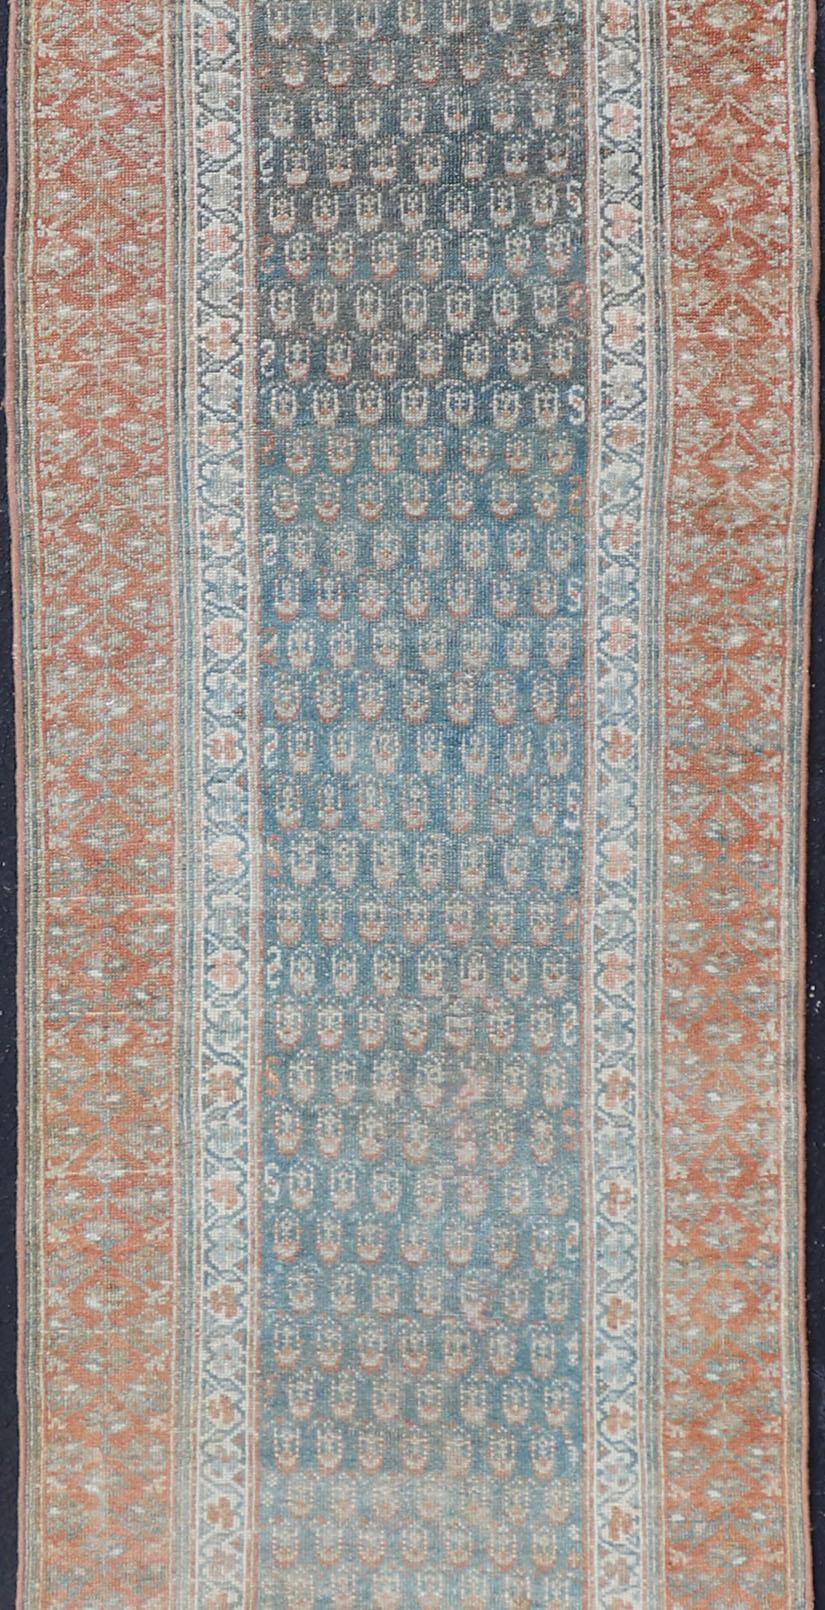 20th Century Paisley Field Antique Persian Kurdish Runner in Soft Teal Colors & Orange For Sale